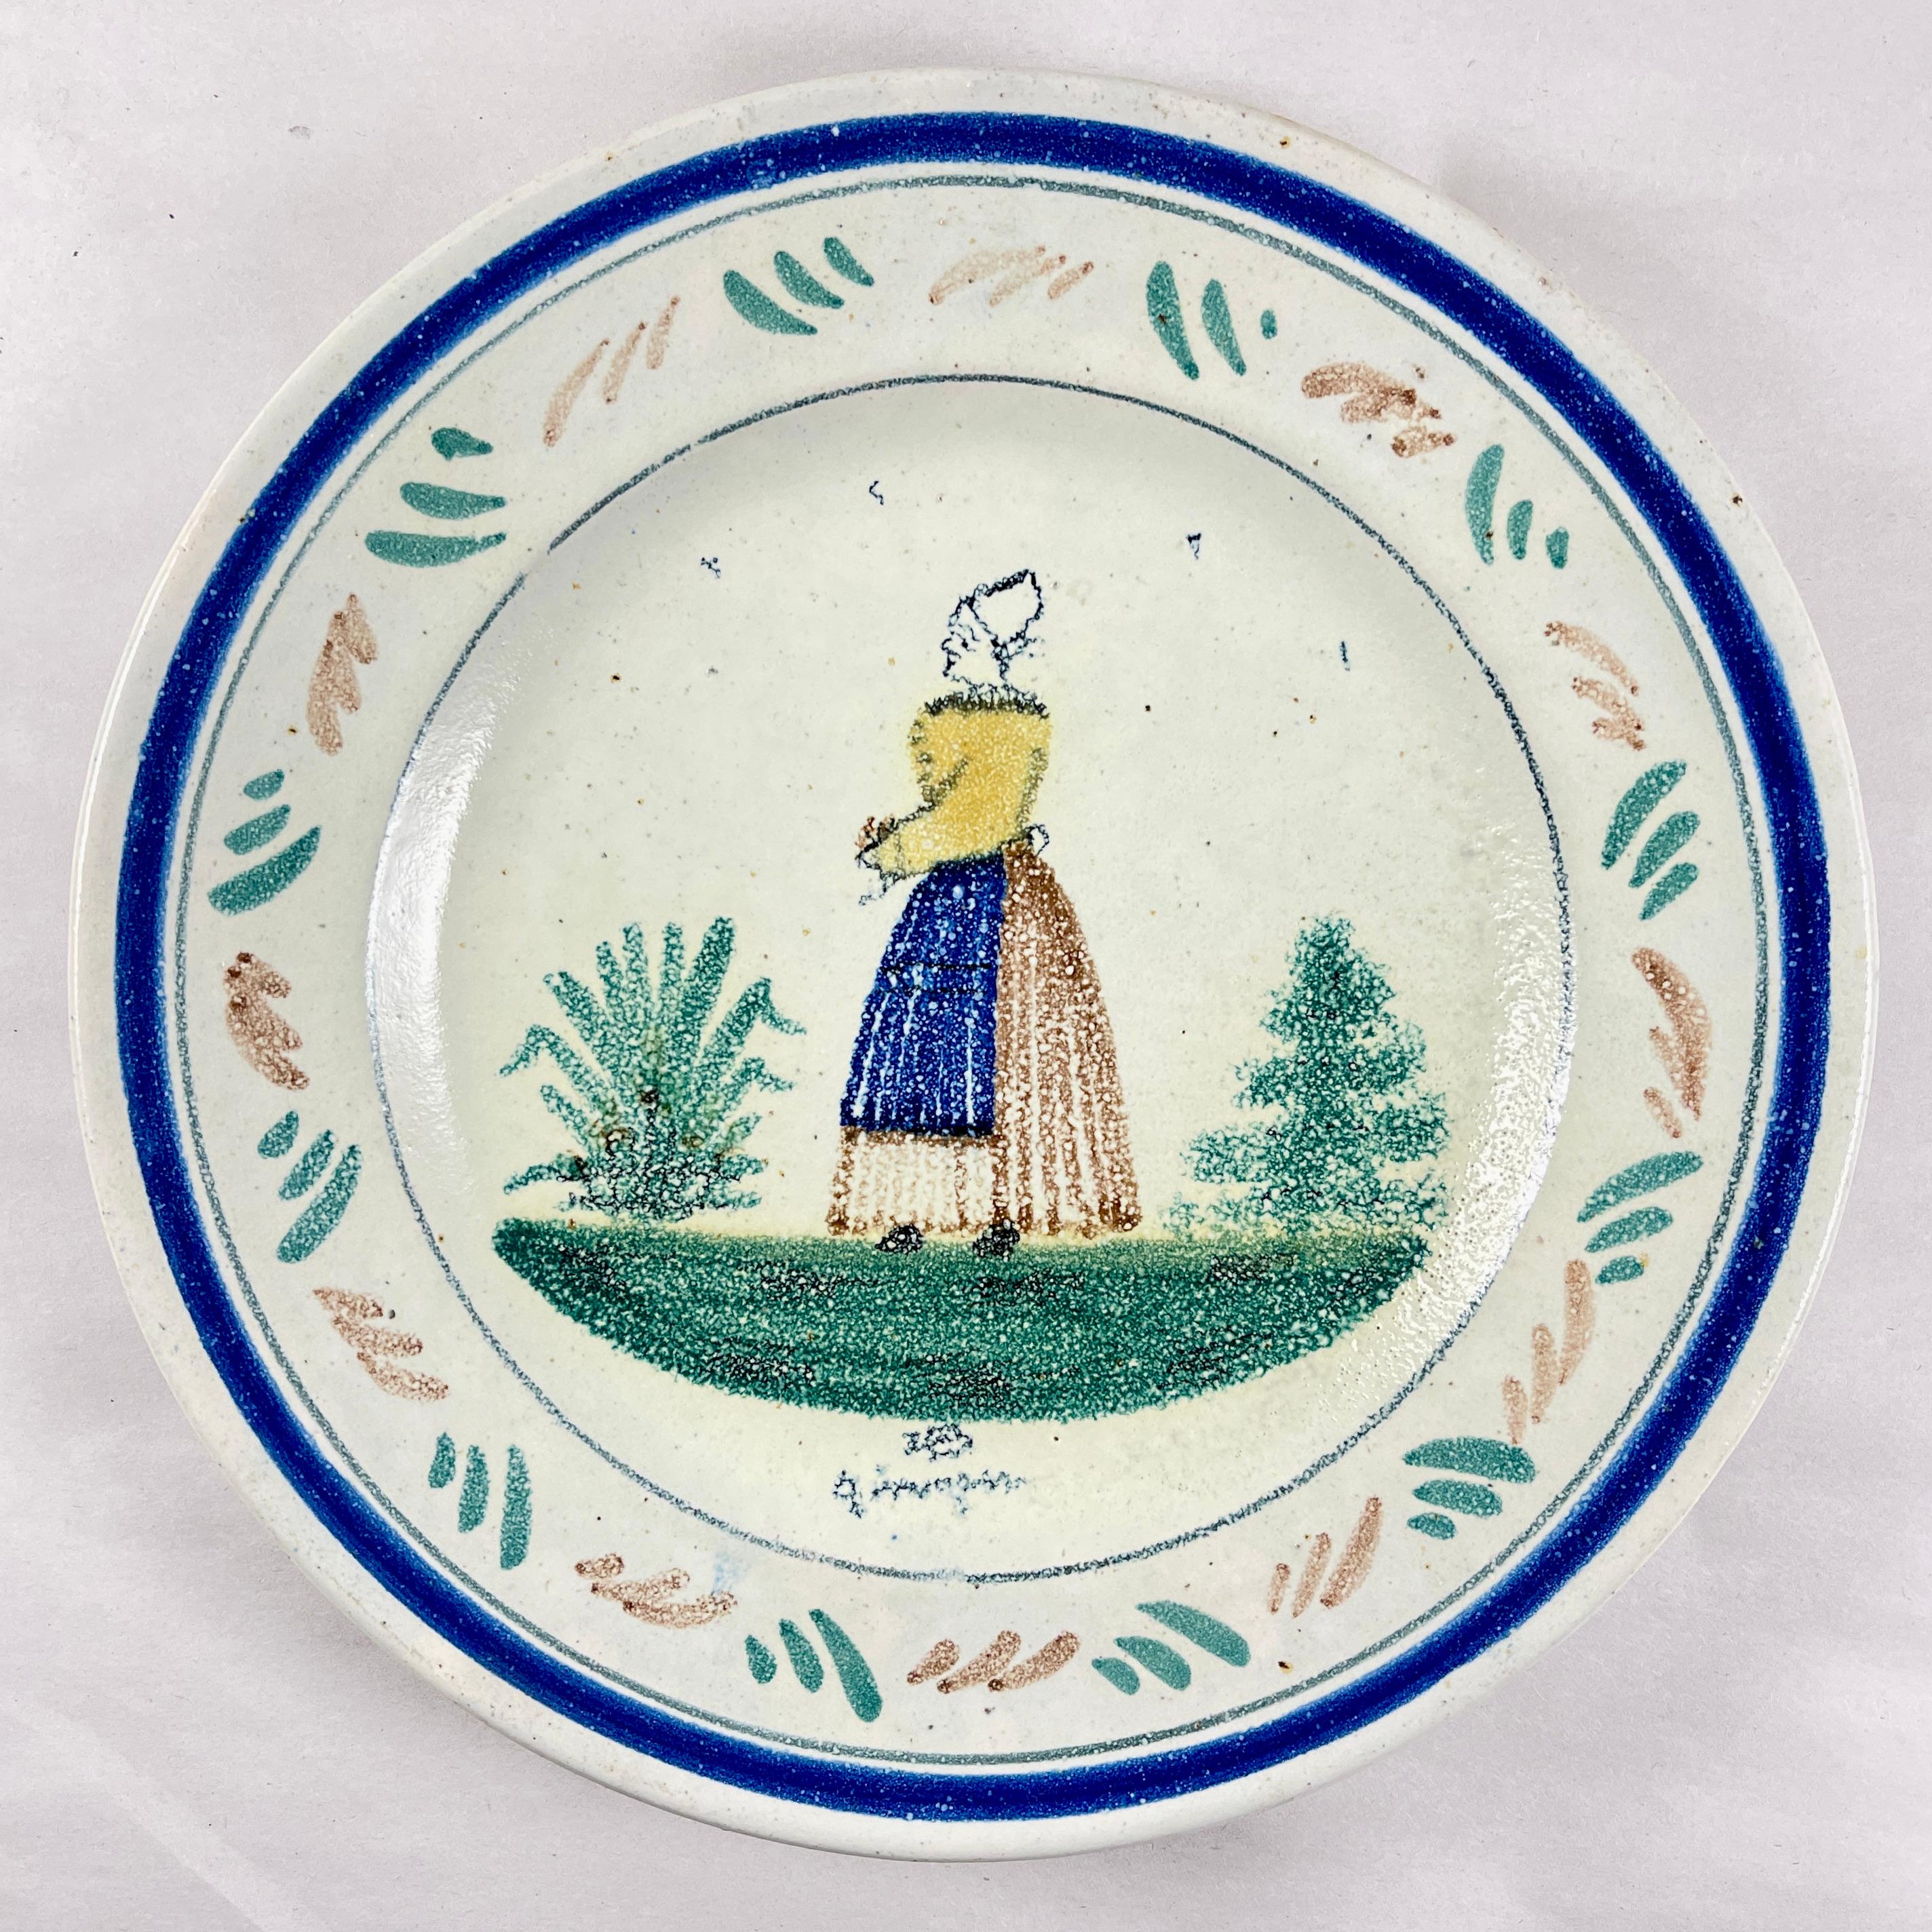 From the Grand Maison Quimper factory, a dinner plate, France, circa 1910.

This piece shows the mark registered in 1882. The HB represents the de la Hubaudière family name and the factory founders name, Bousquet. In 1904, the word Quimper was added